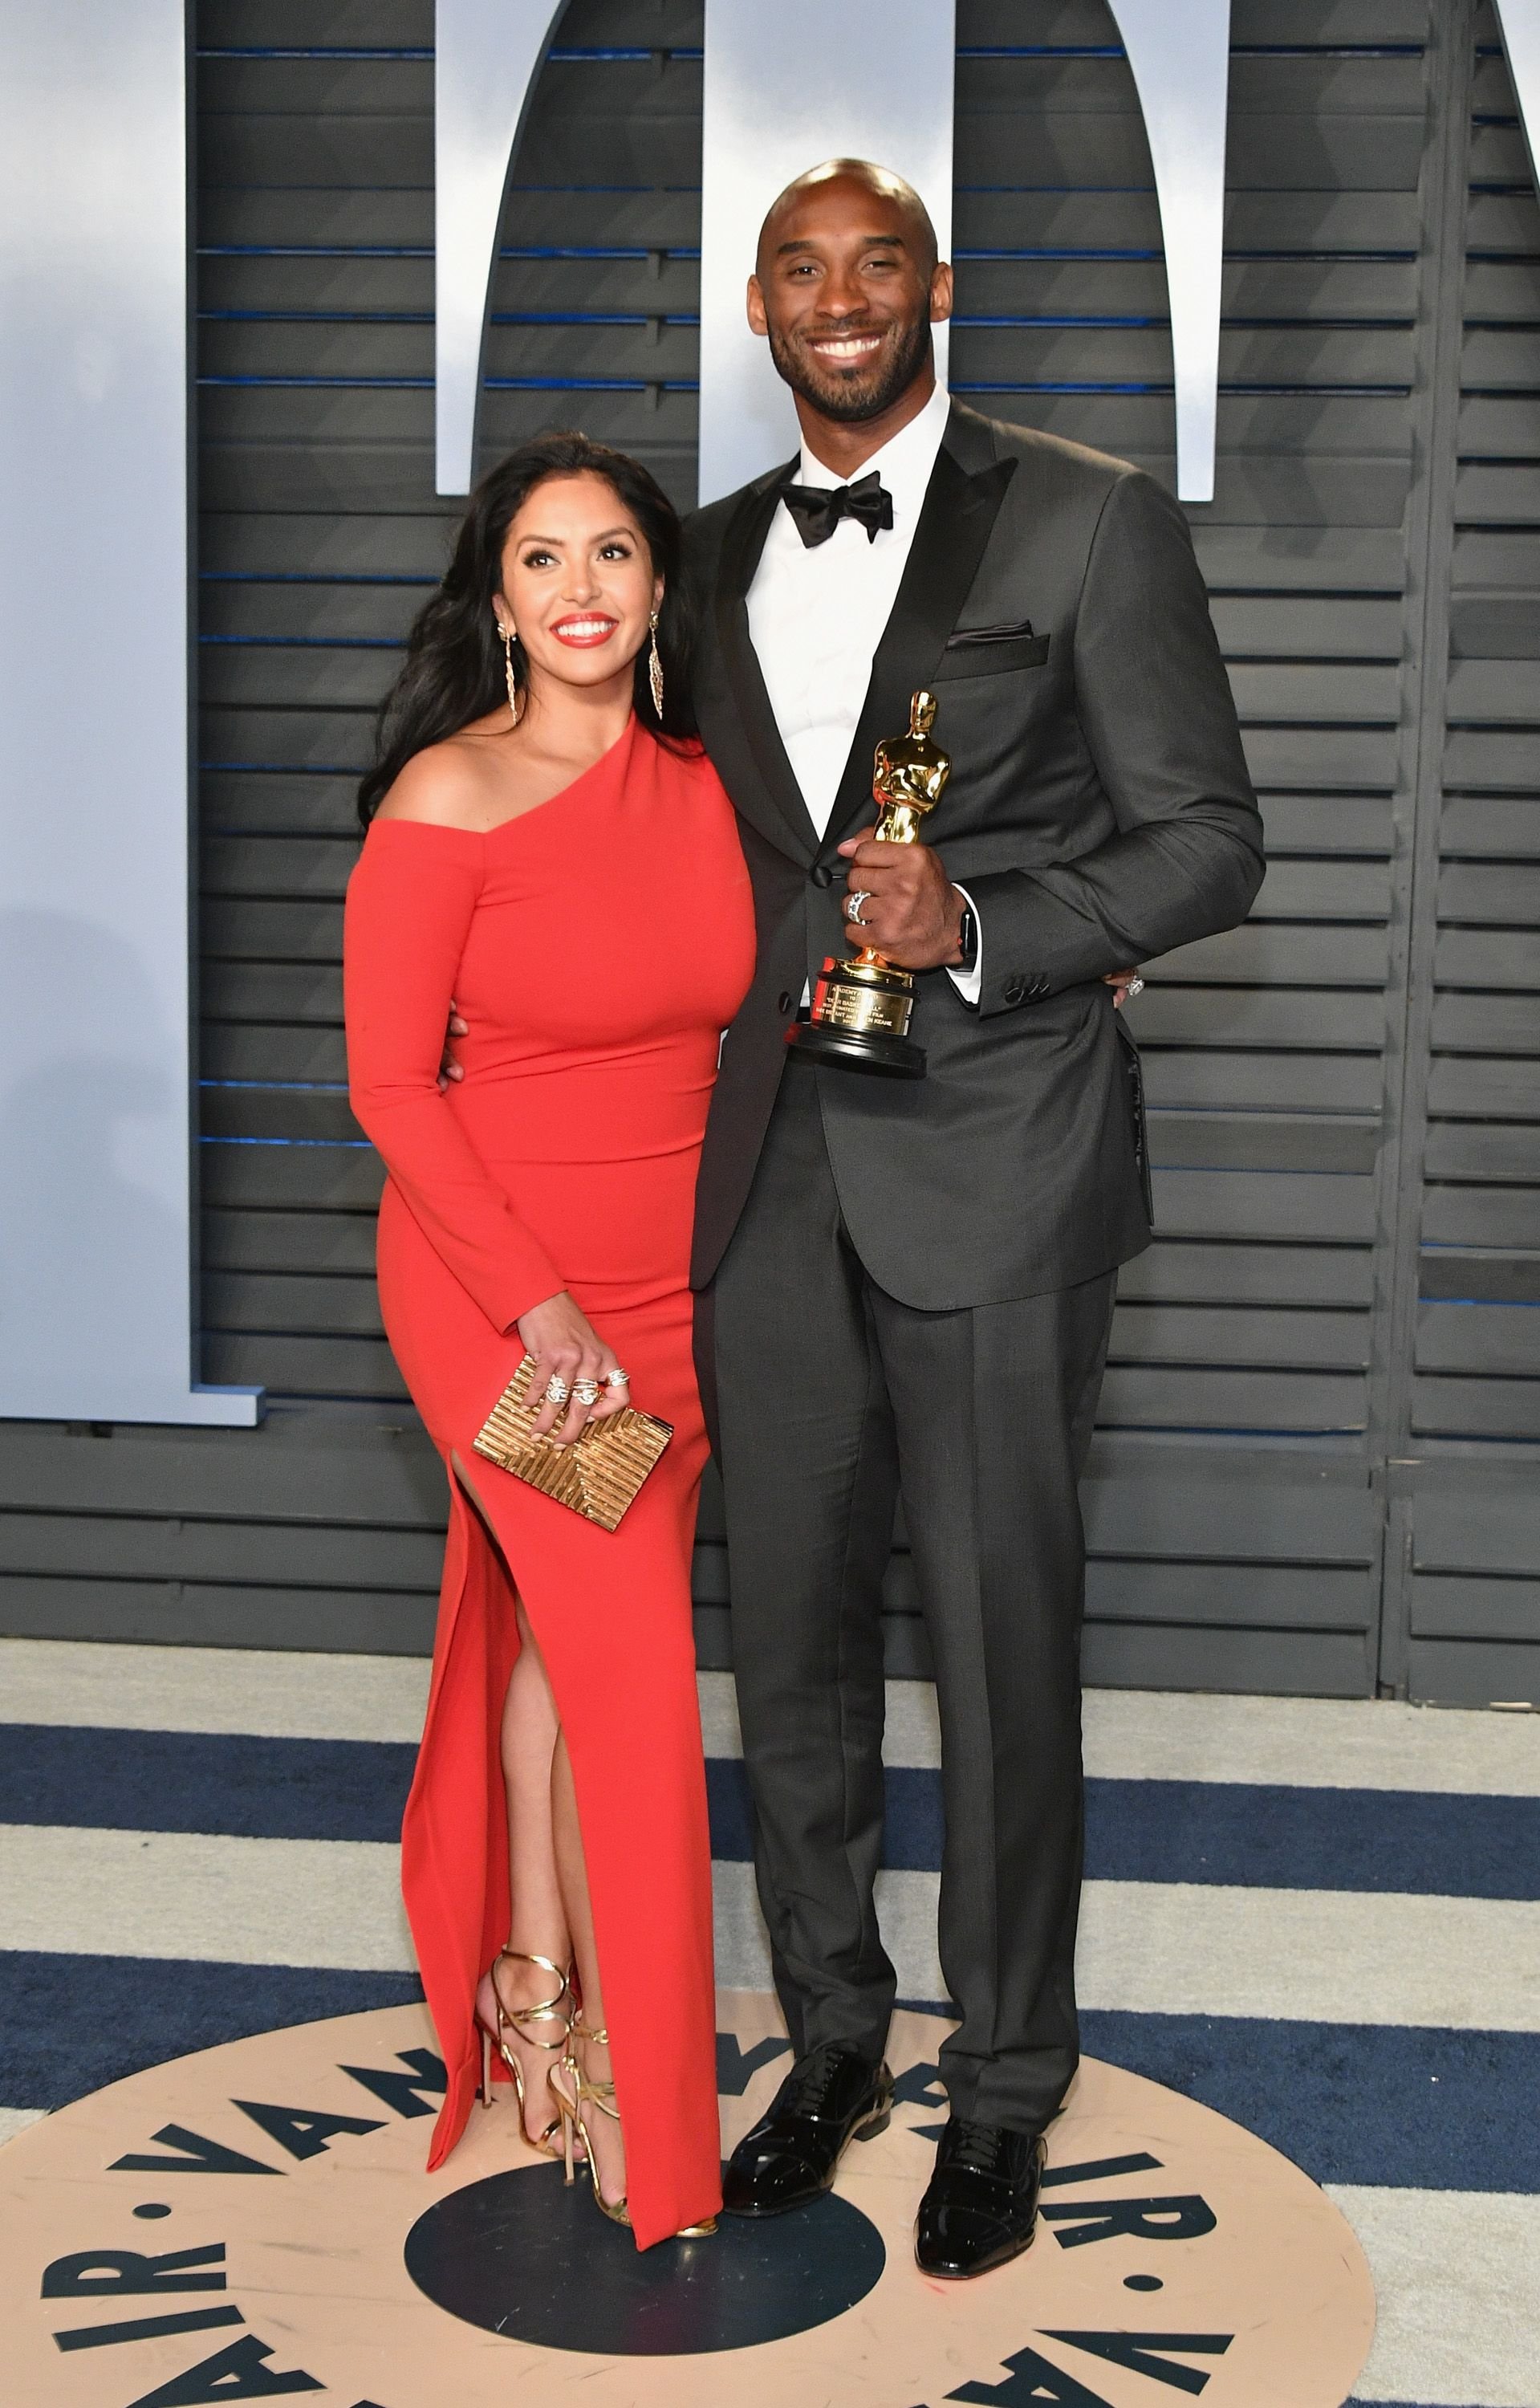 Vanessa Bryant and Kobe Bryant at the 2018 Vanity Fair Oscar Party at Wallis Annenberg Center for the Performing Arts on March 4, 2018. | Photo: Getty Images